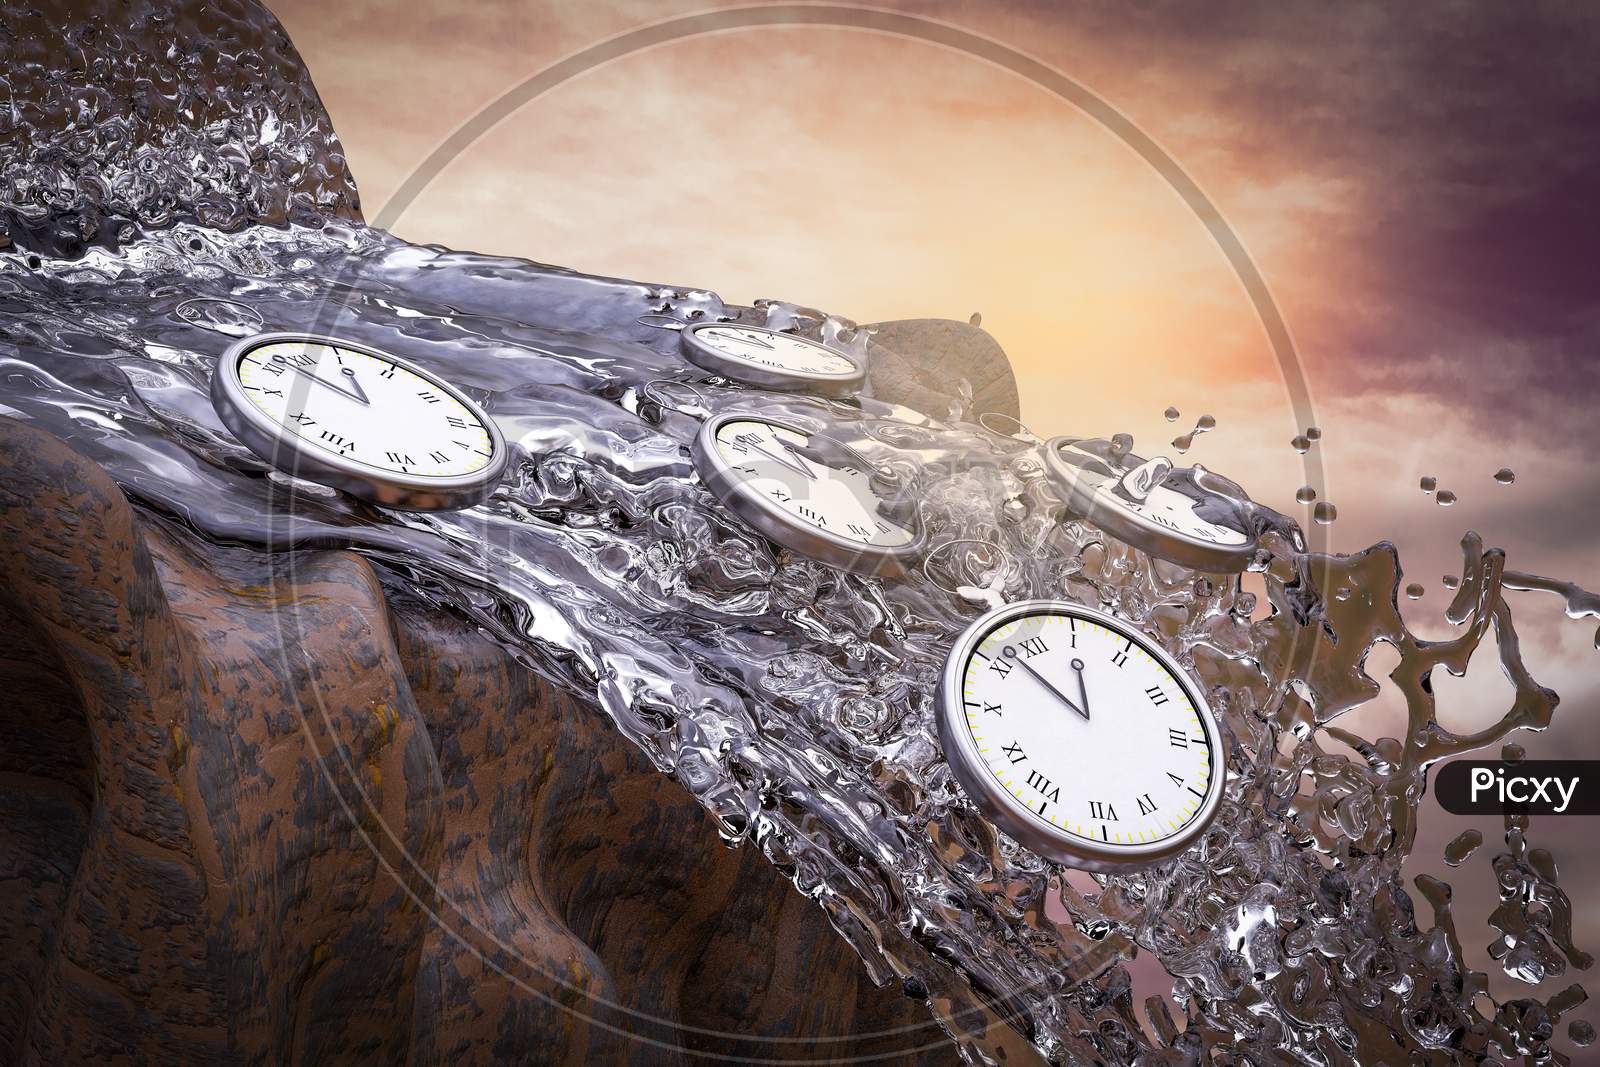 Pocket Watch Fall From A Waterfall At Sunset Magenta Day Demonstrating Time Limit Concept. 3D Illustration